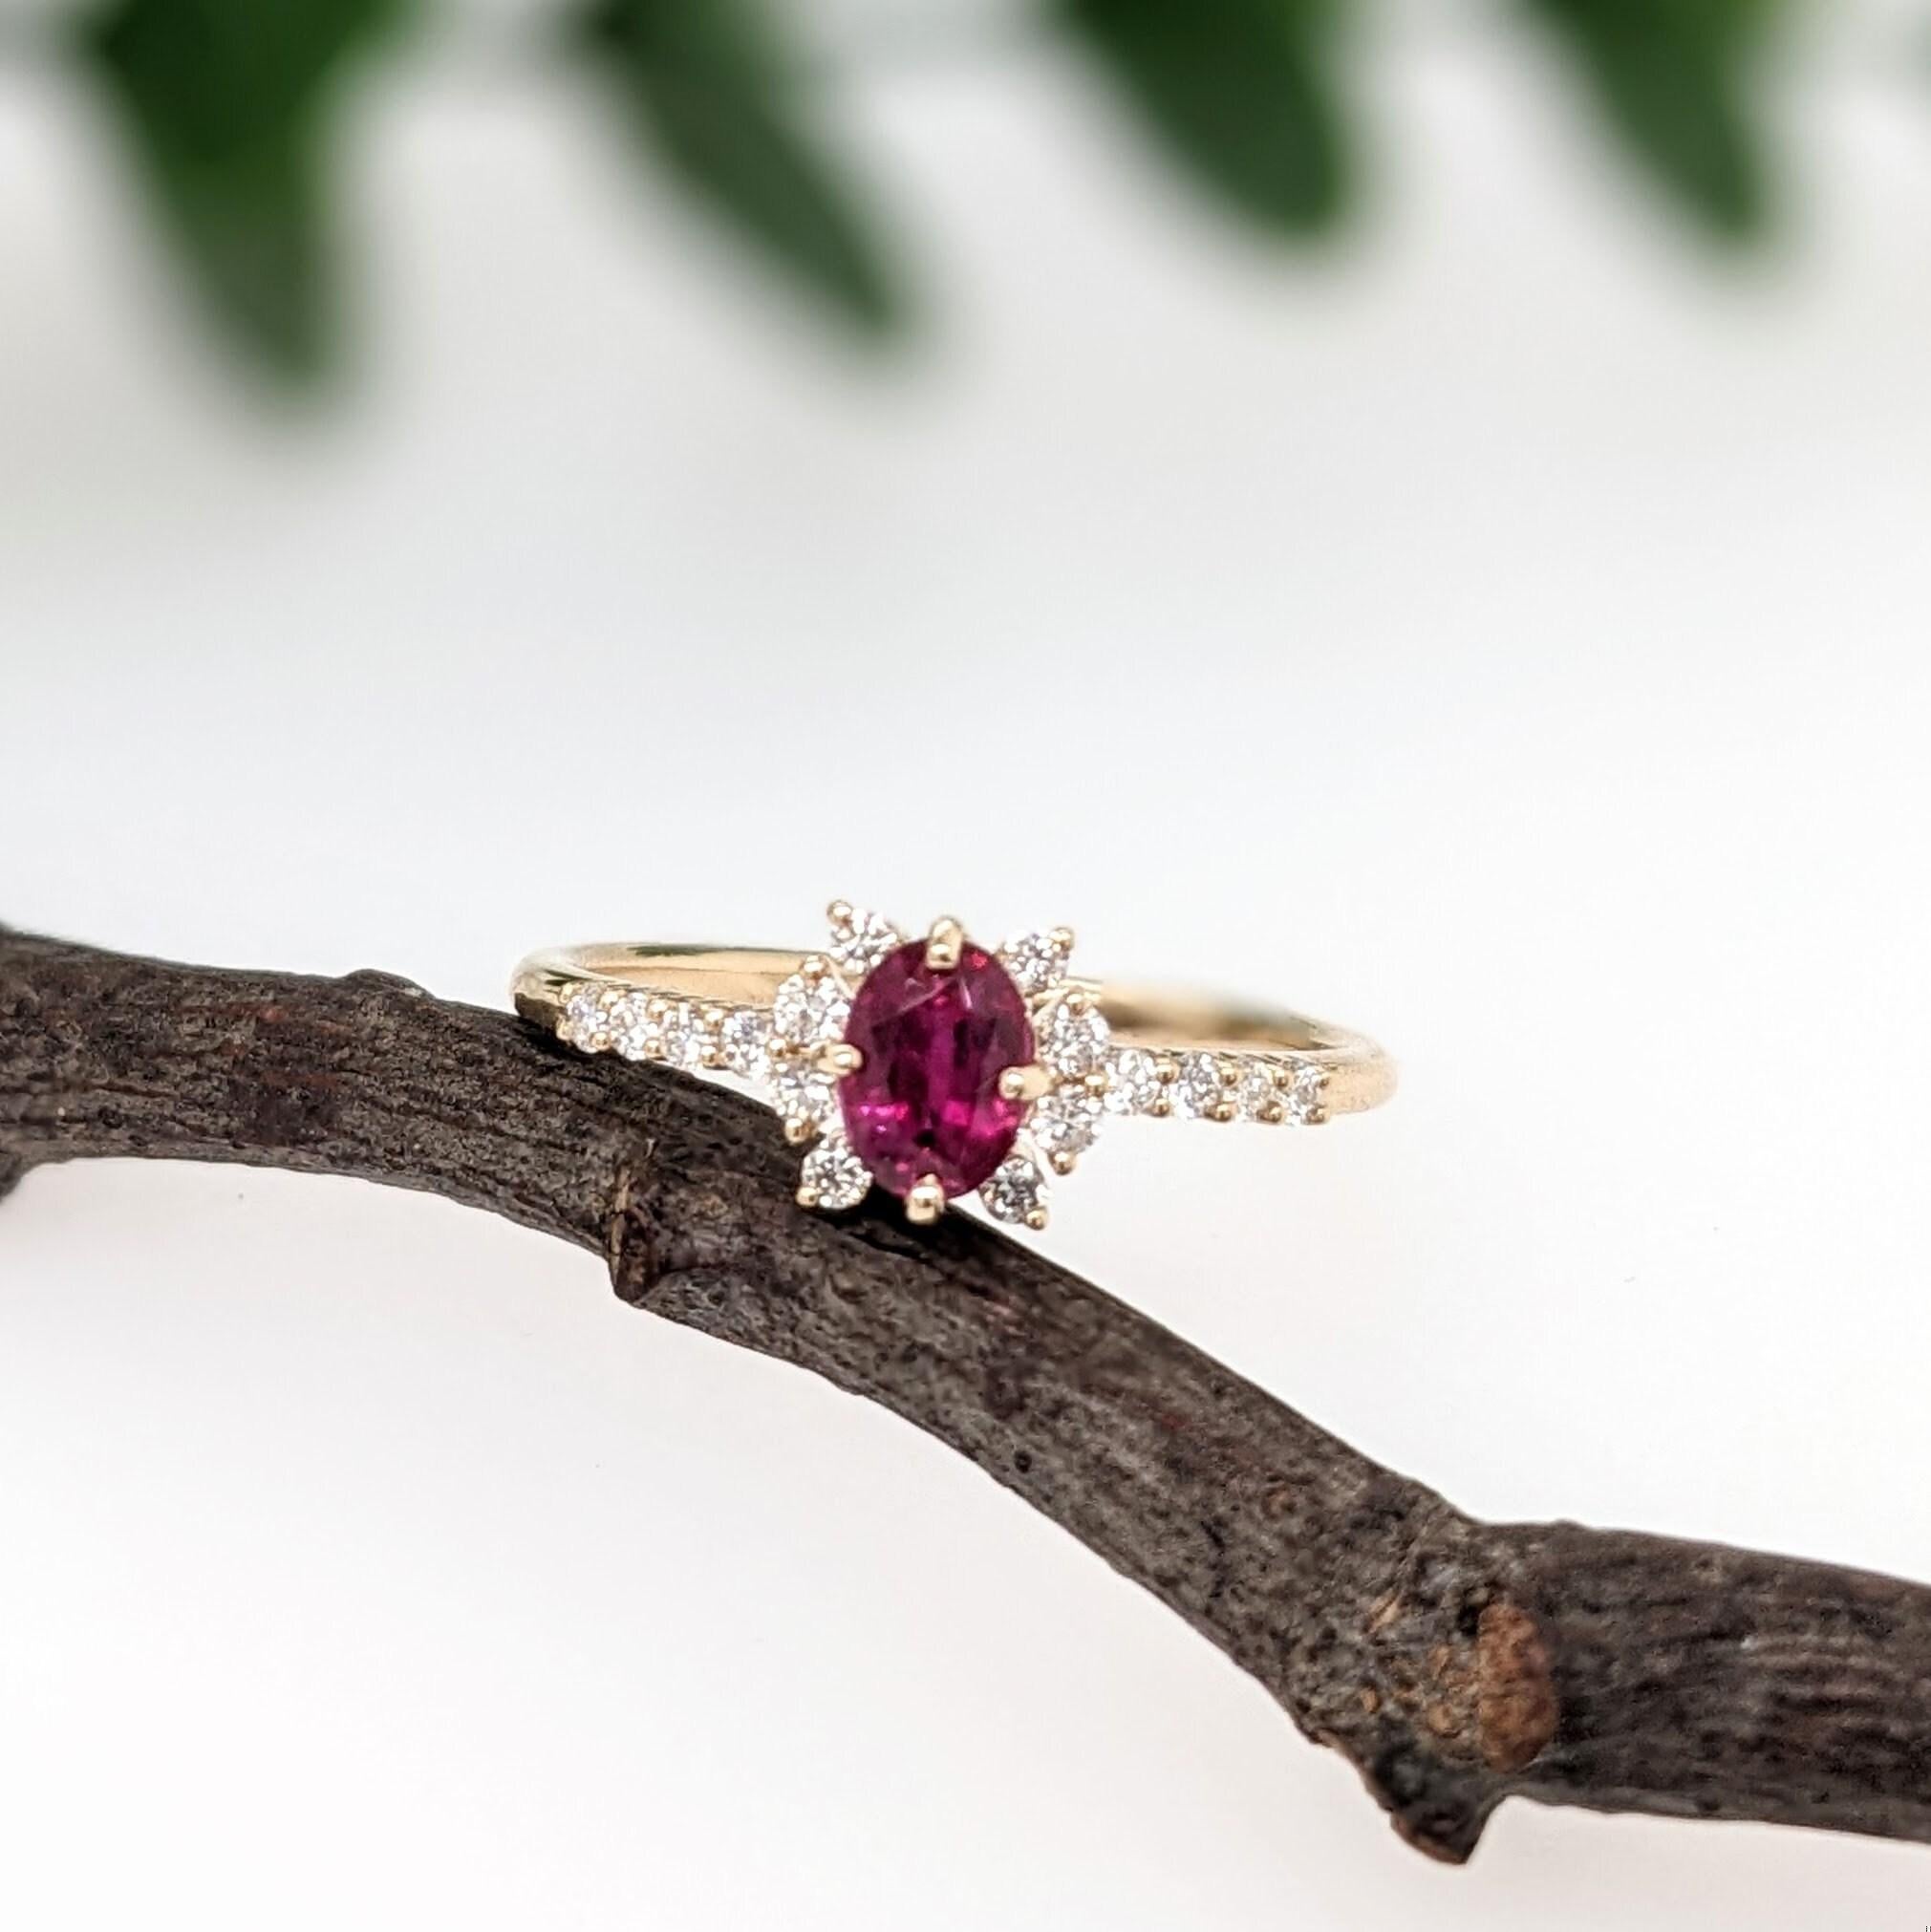 This ring features a gorgeous pigeon blood red heated ruby from Madagascar, held in place by a compass pronged setting in 14k solid yellow gold. The natural earth mined diamond accents are meaningfully place to created a unique halo shape that